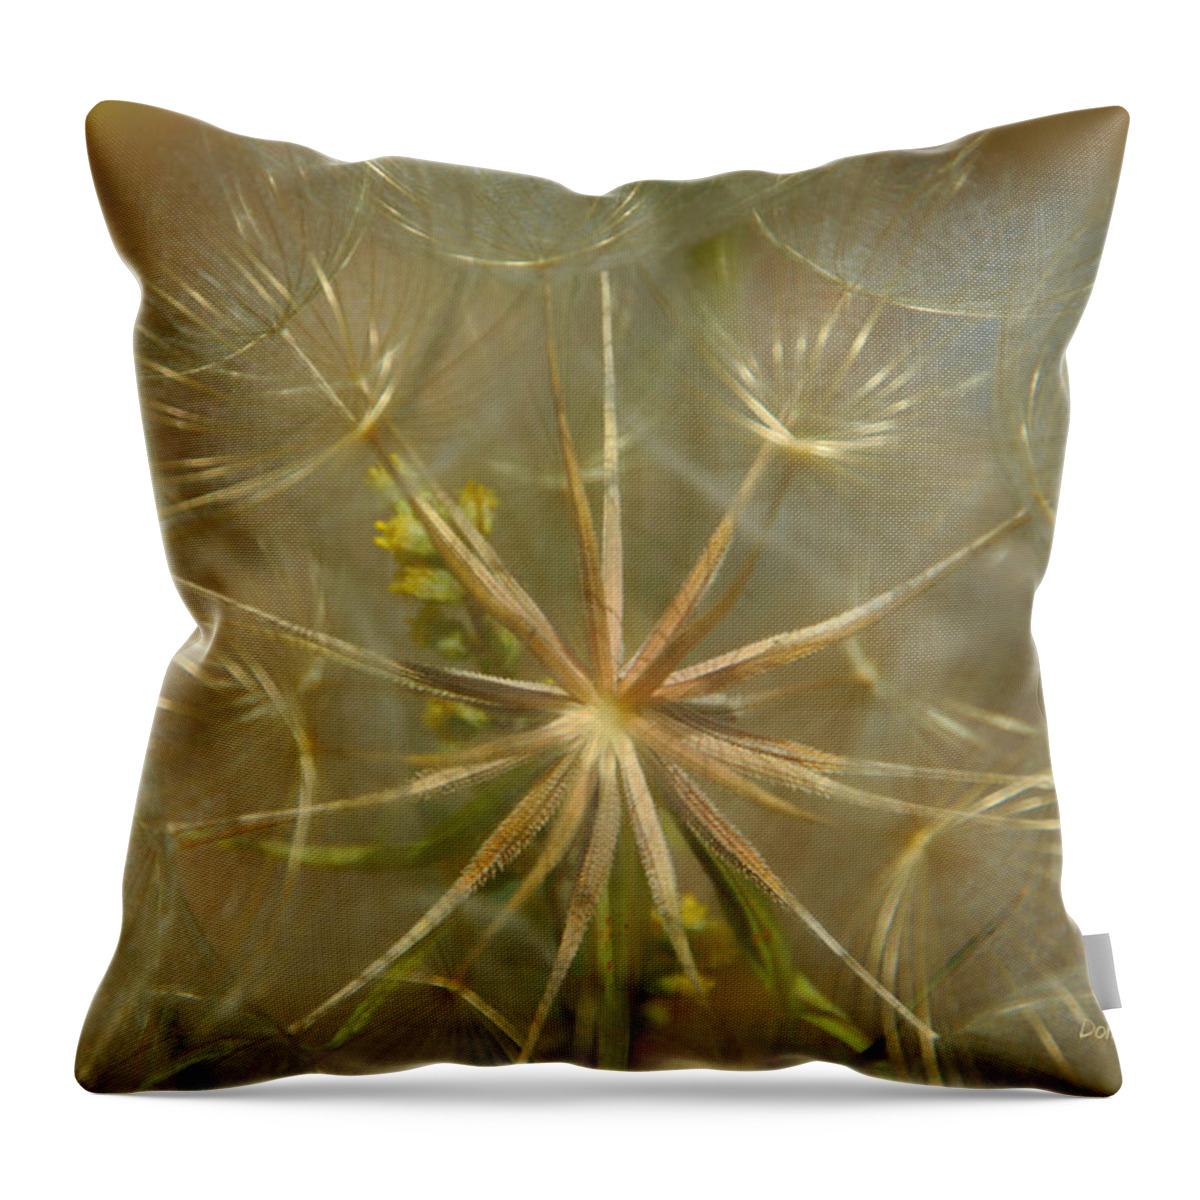 Dandelion Throw Pillow featuring the photograph Make A Wish by Donna Blackhall